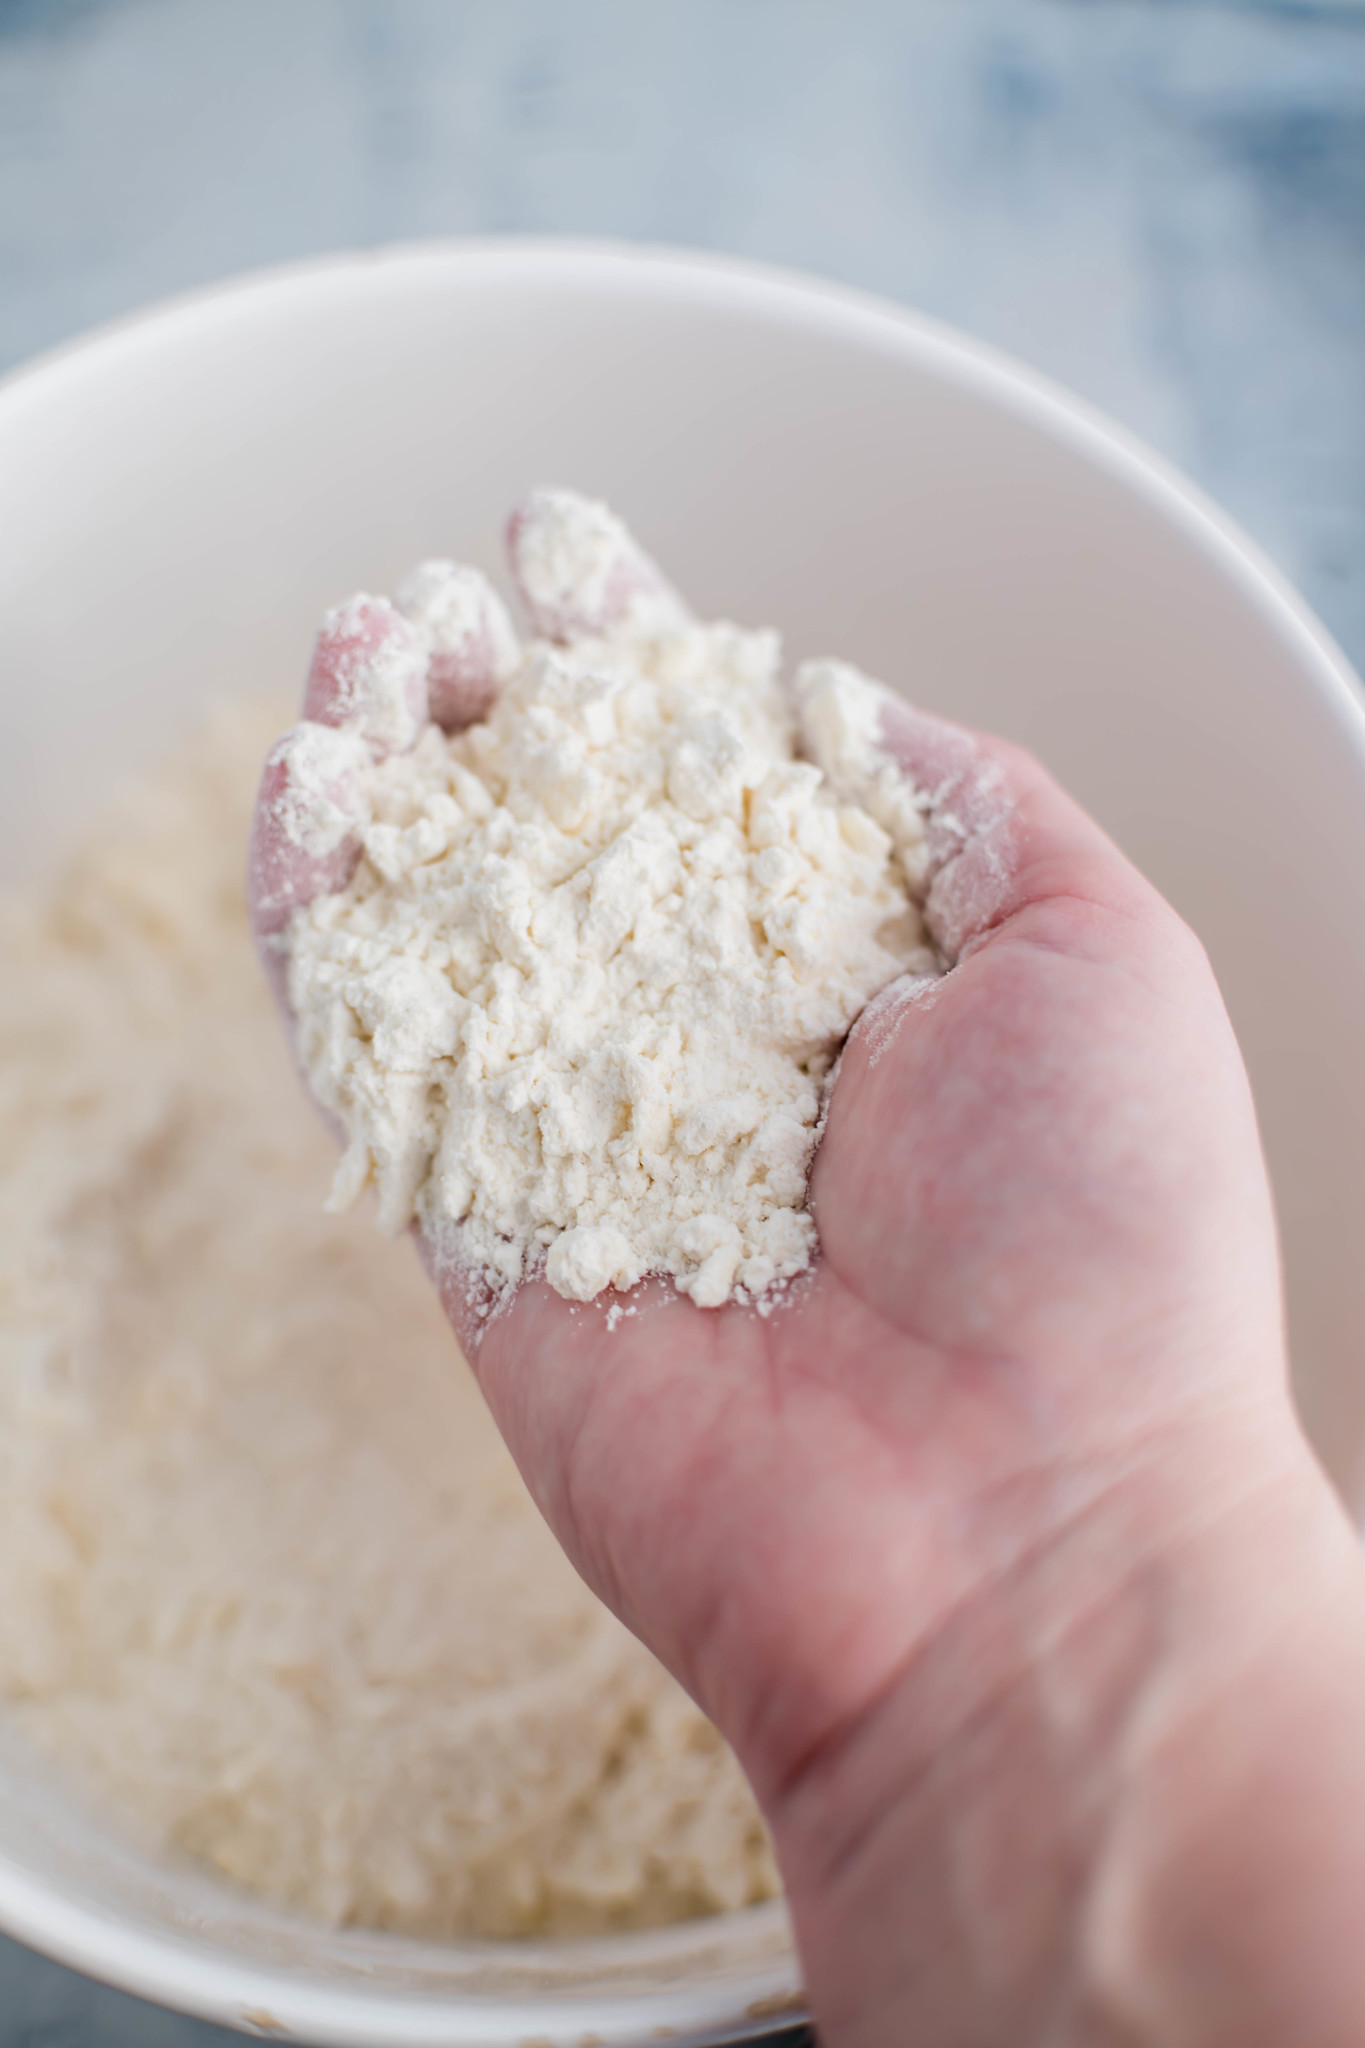 Flour and butter mixed together. Hand lifting it out of the bowl to show the texture.